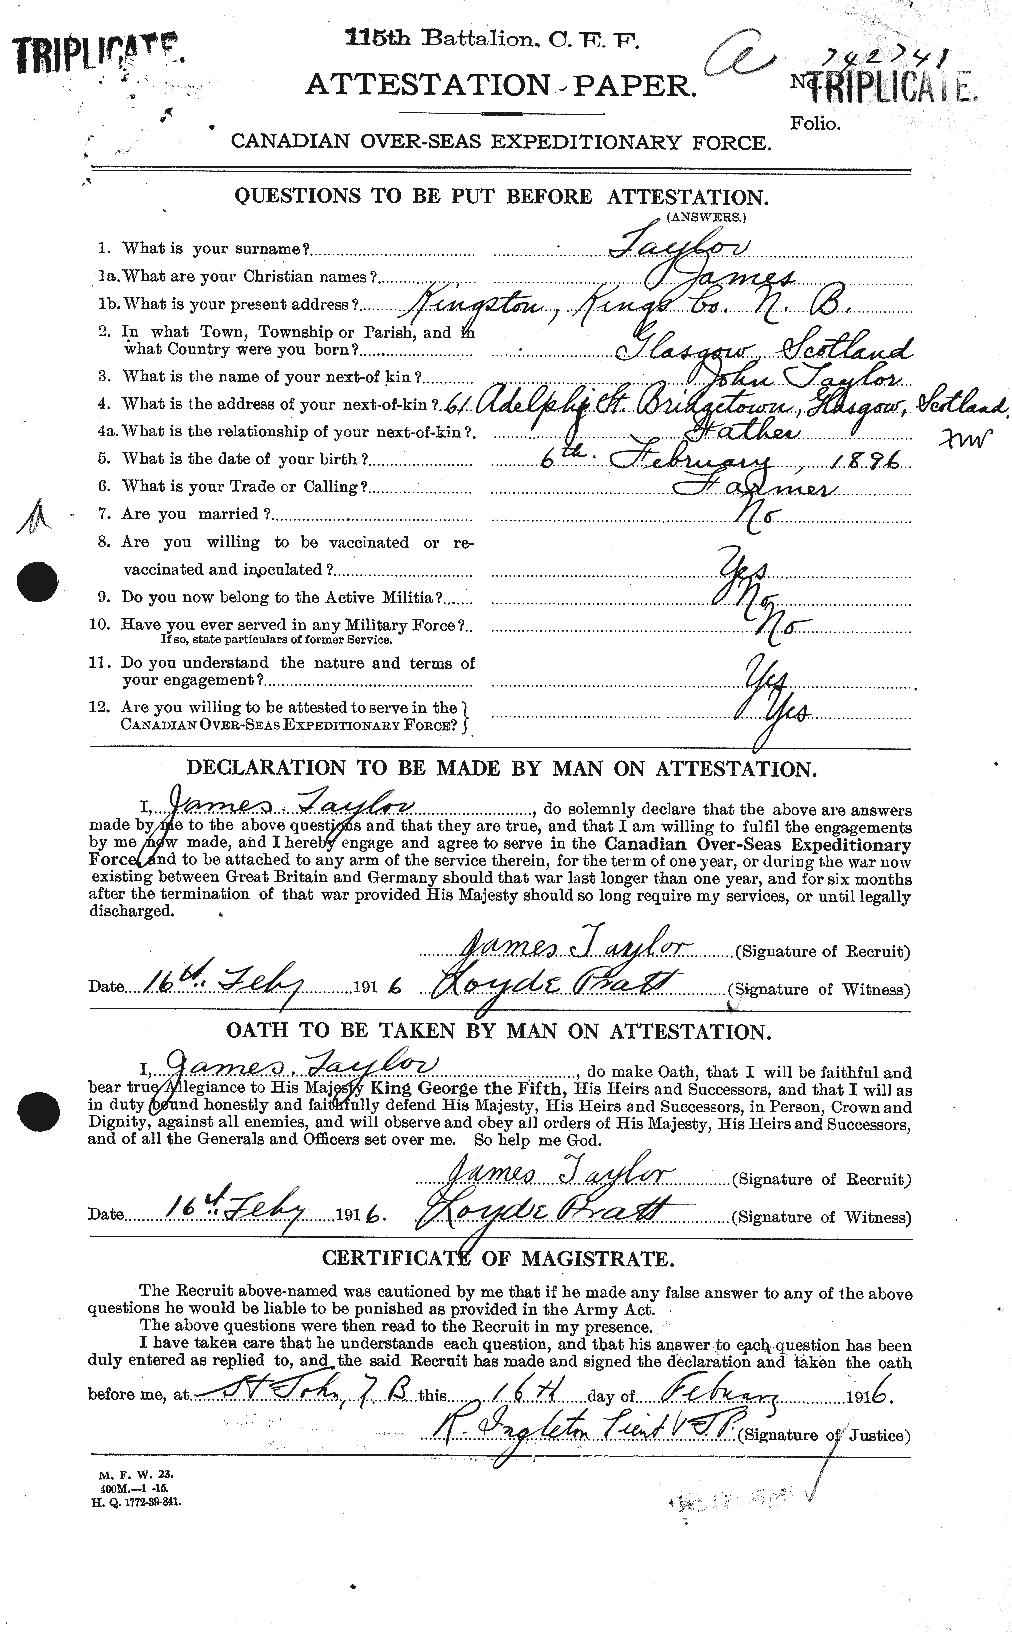 Personnel Records of the First World War - CEF 626692a